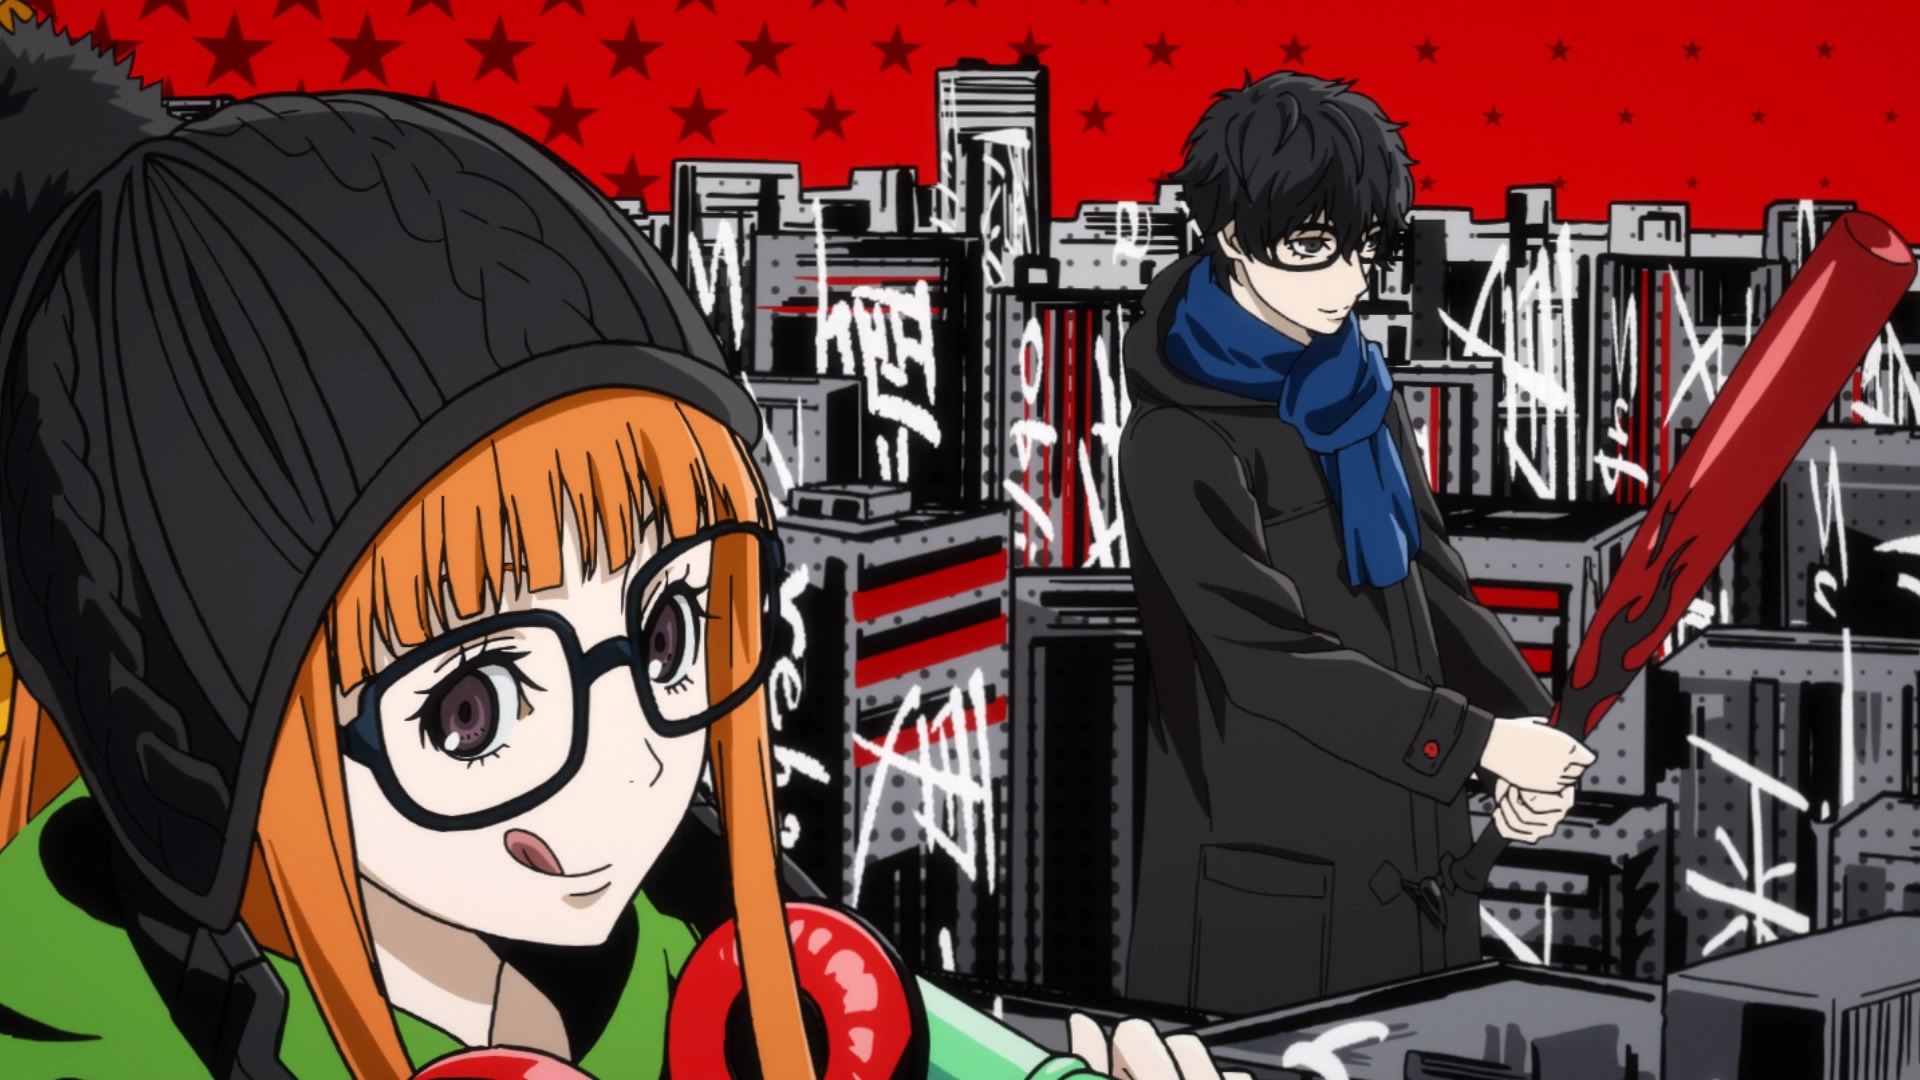 Persona 5 Royal - 2020 GOTY Review